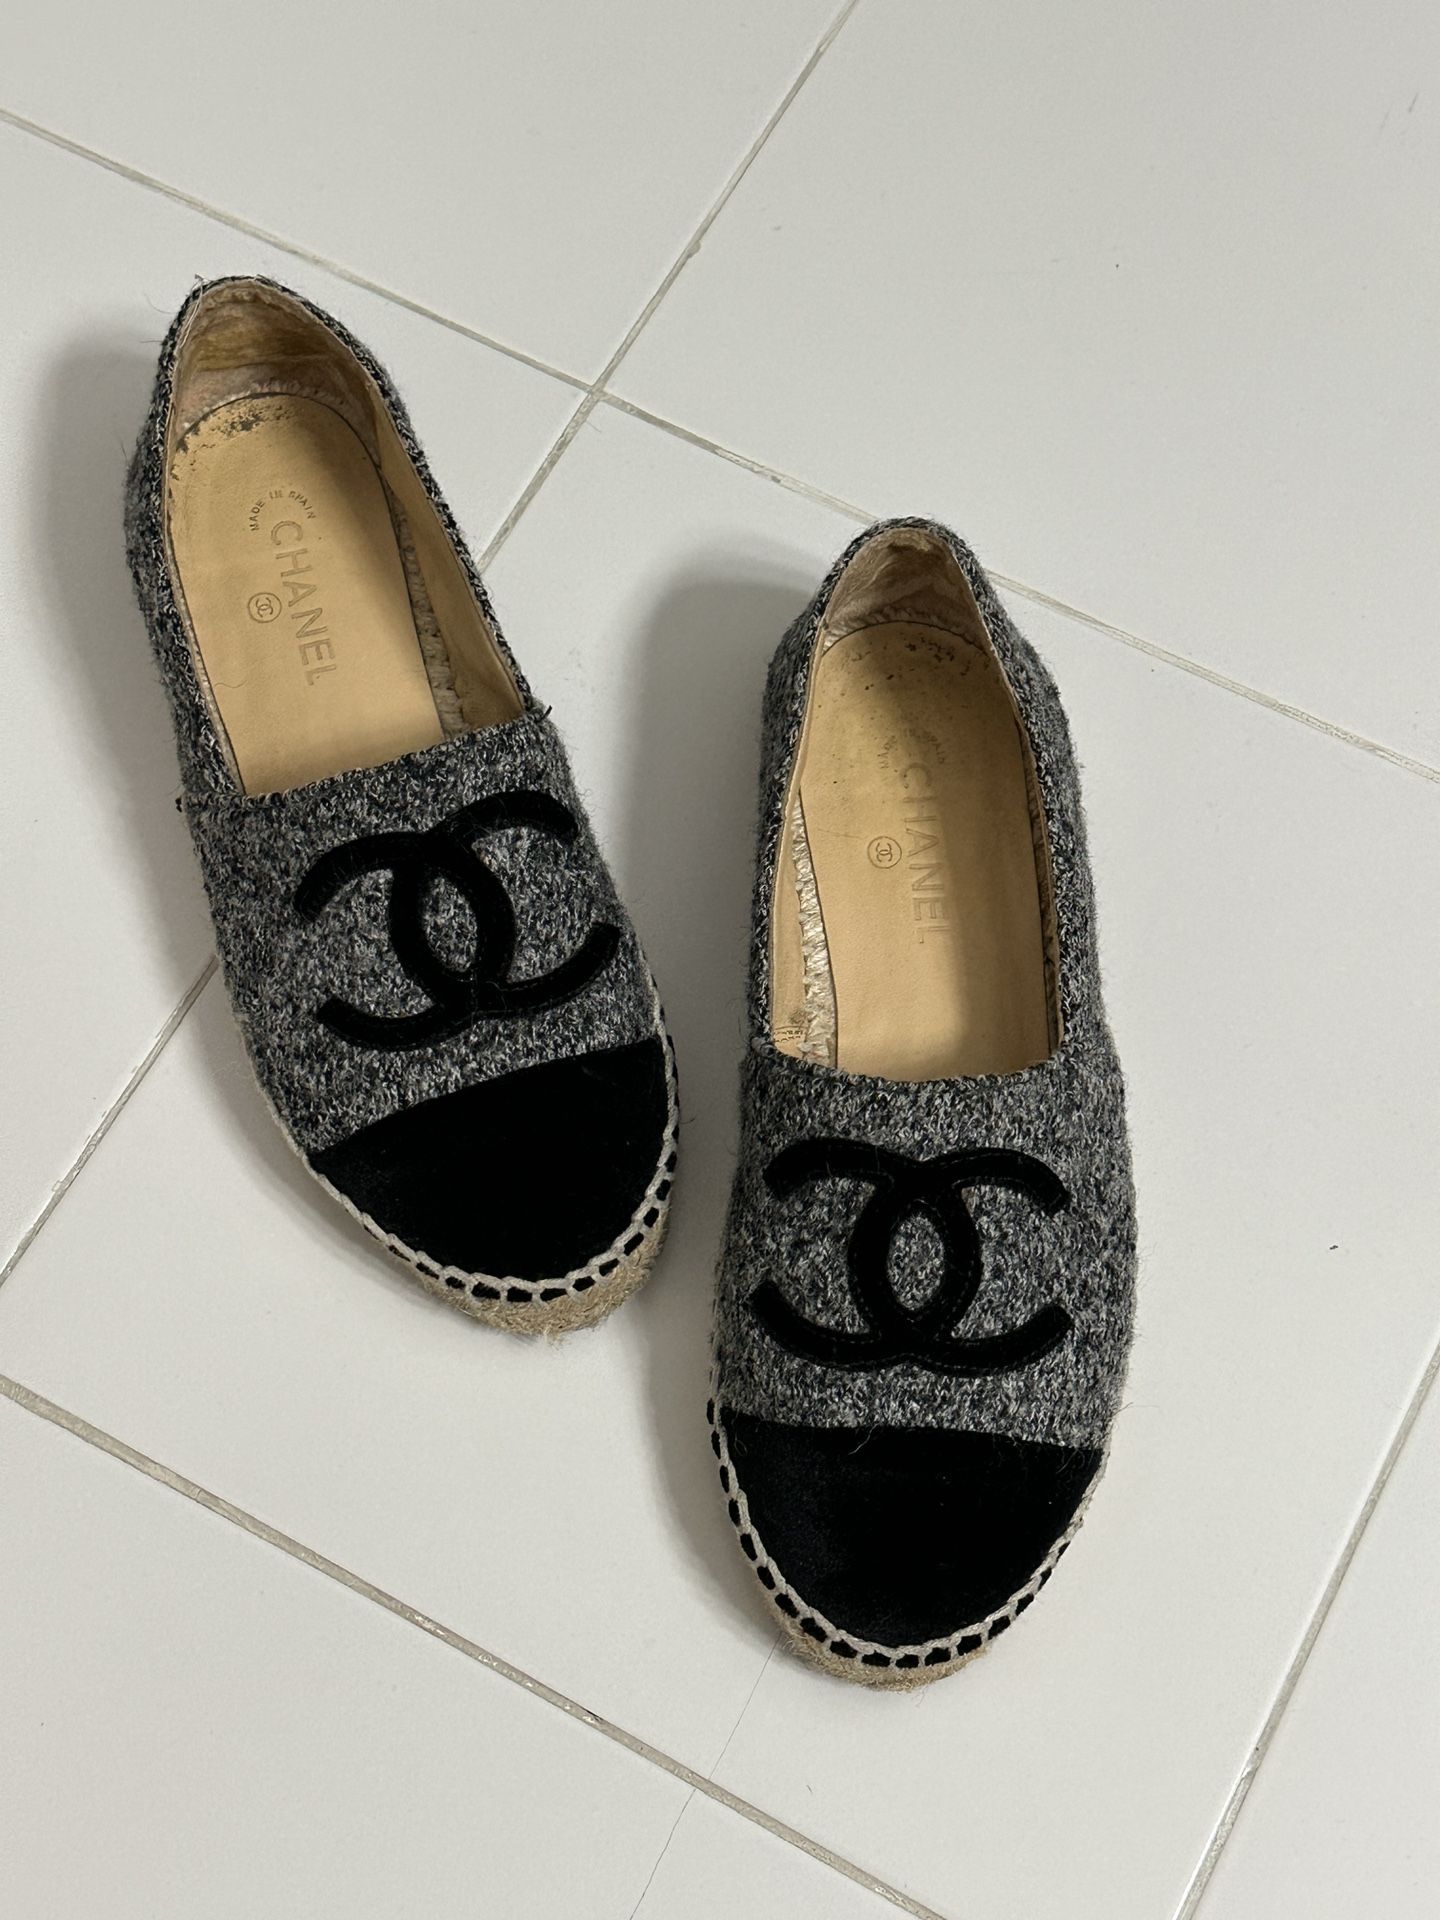 CHANEL Women Shoes for Sale in Miami, FL - OfferUp